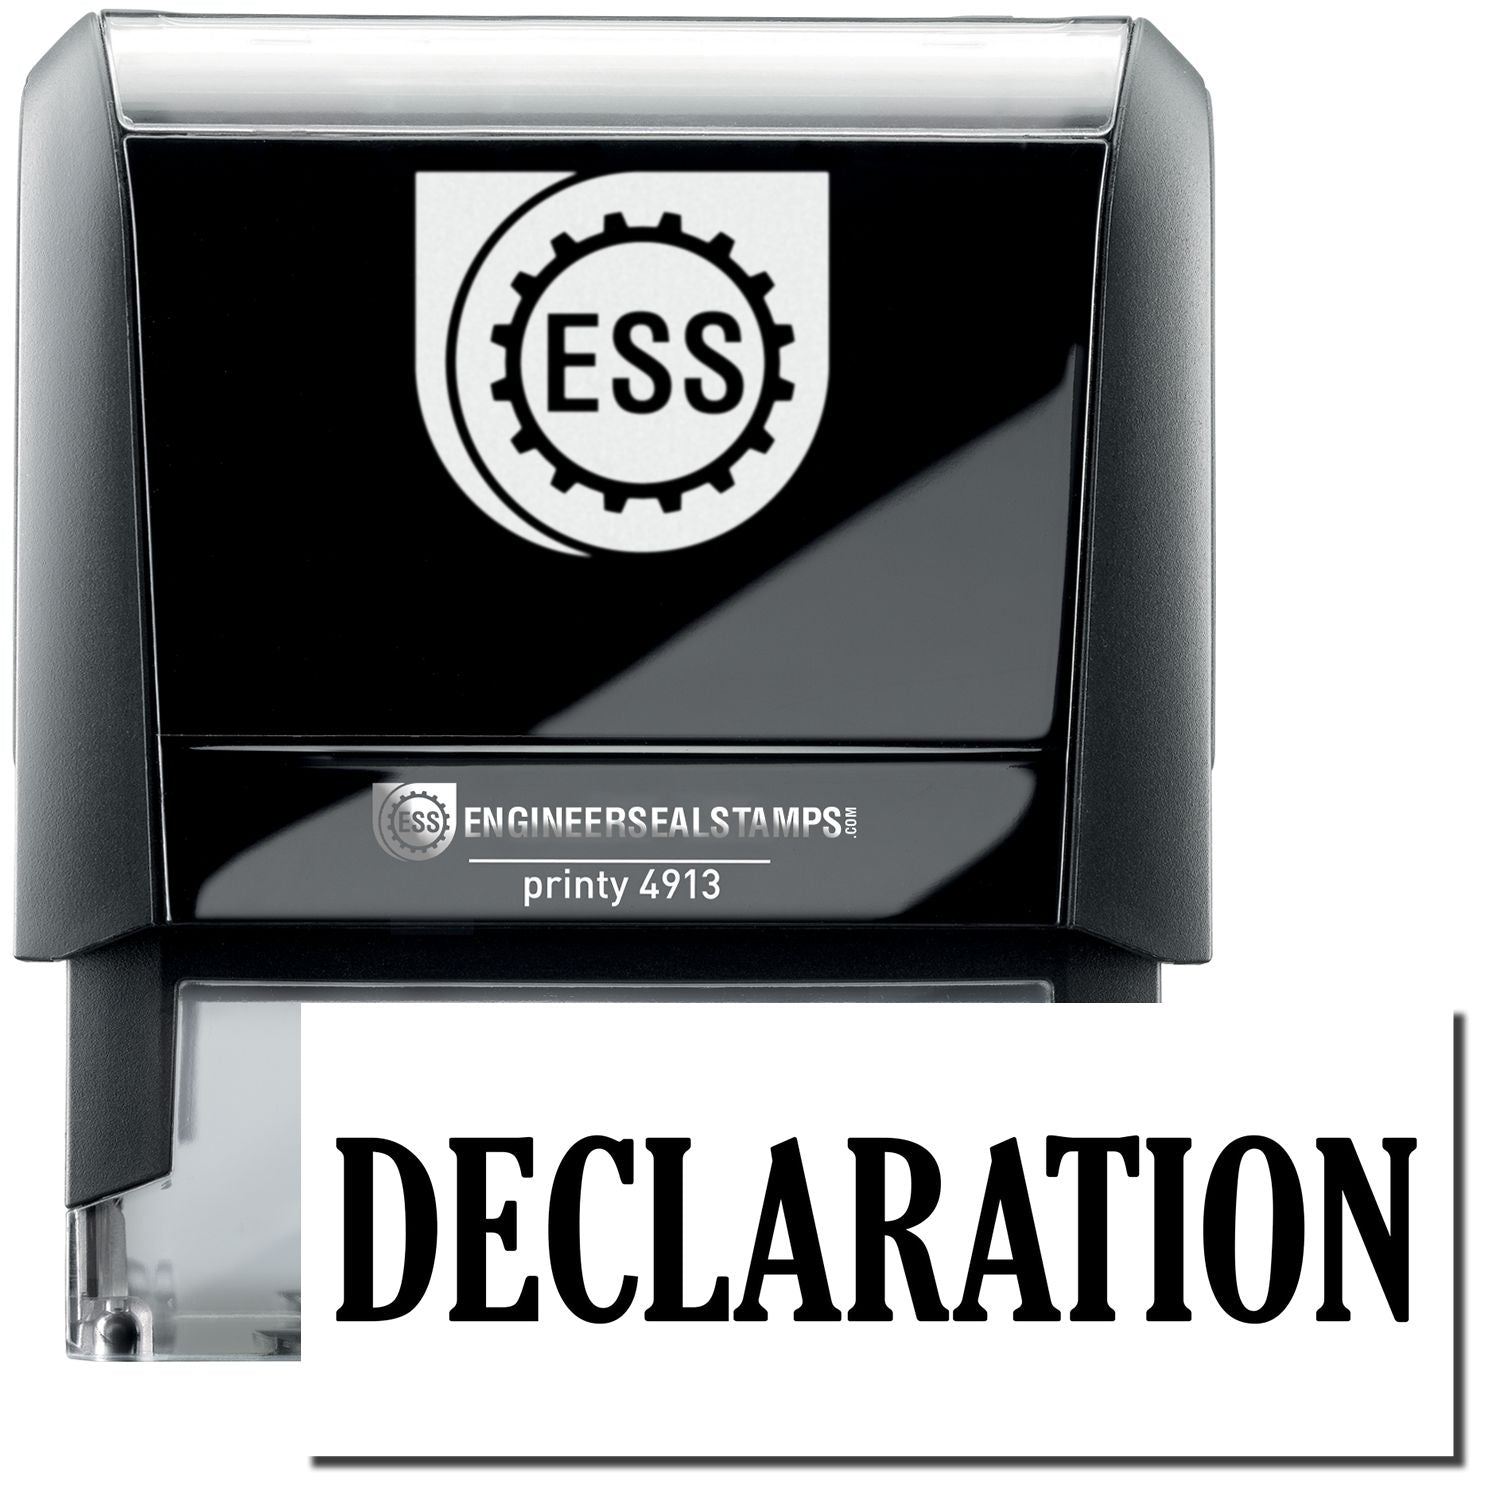 A self-inking stamp with a stamped image showing how the text "DECLARATION" in a large bold font is displayed by it.